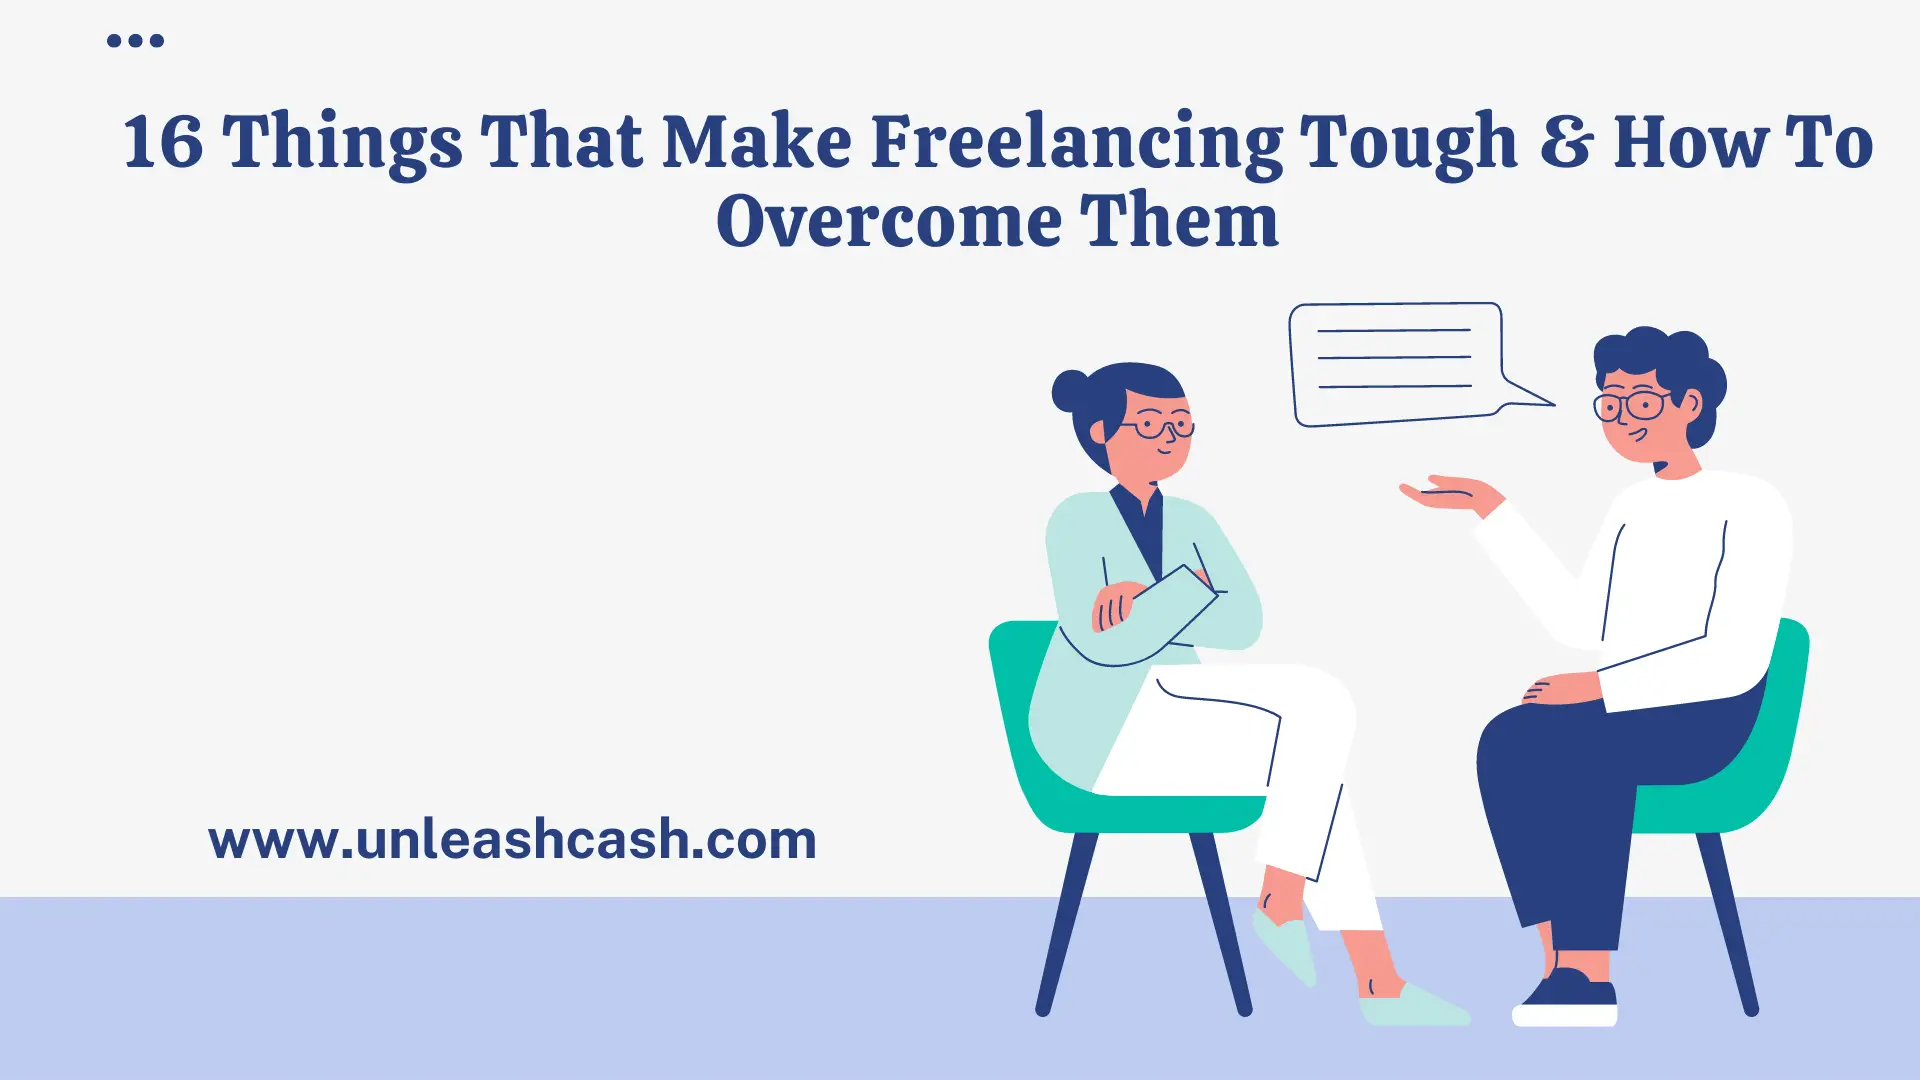 16 Things That Make Freelancing Tough & How To Overcome Them